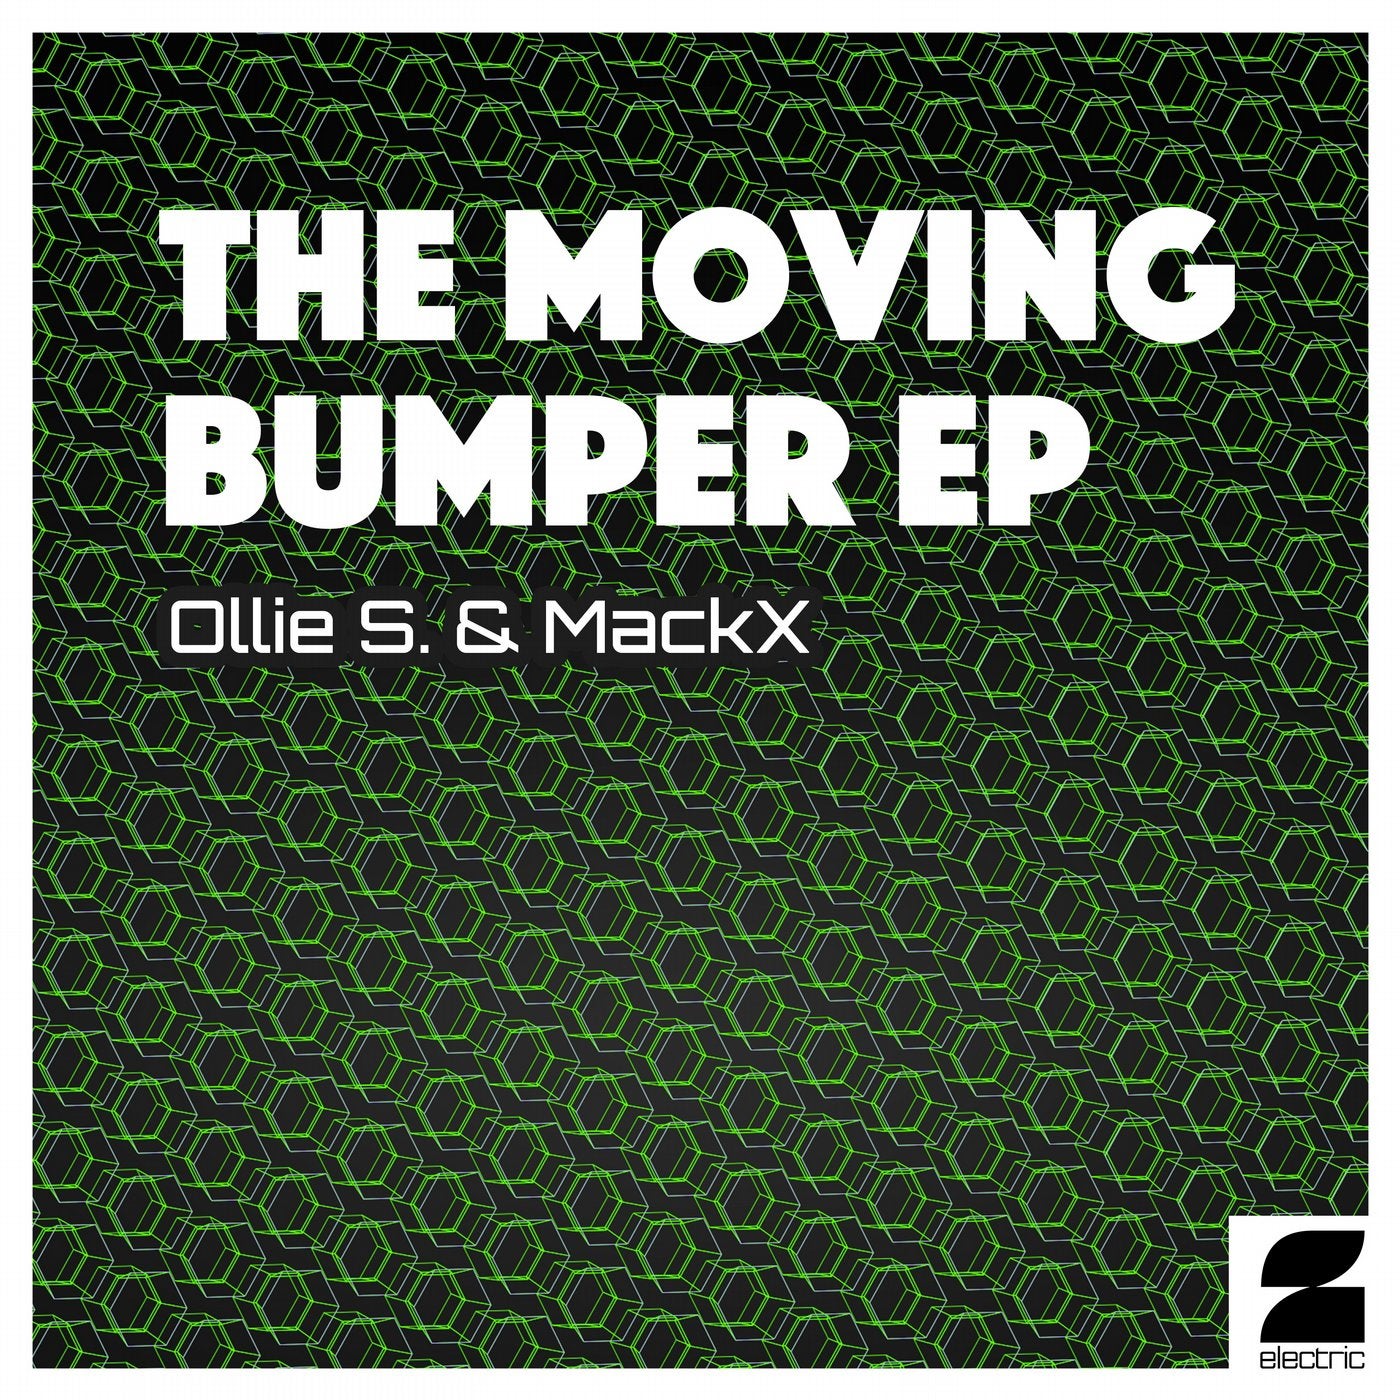 The Moving Bumper EP